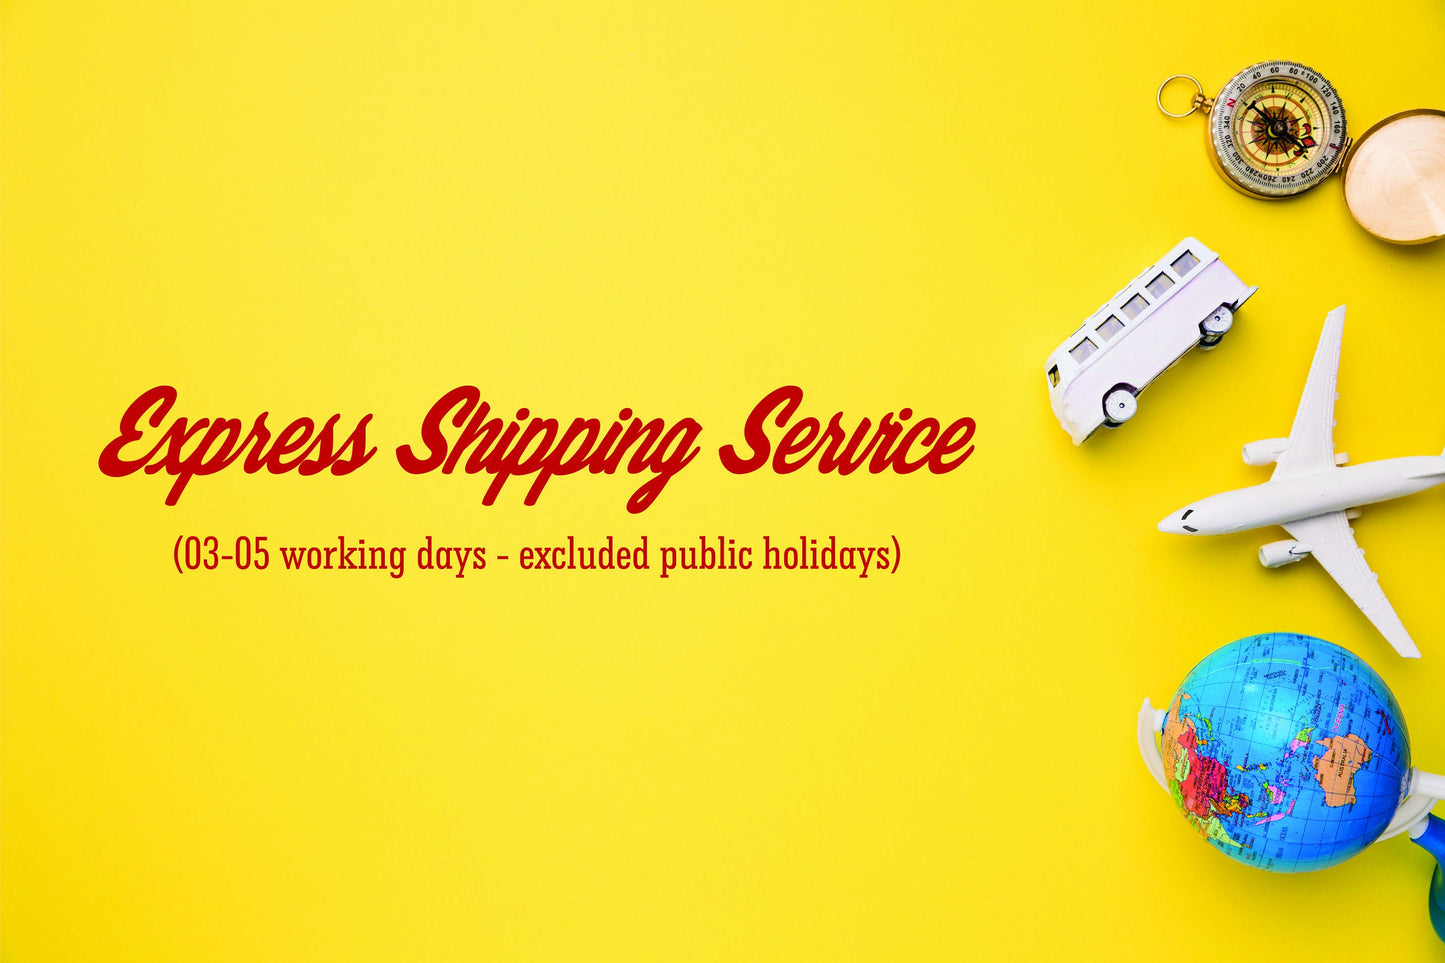 EXTRA SERVICE - Upgrade to Express Shipping service (03-05 working days delivery)